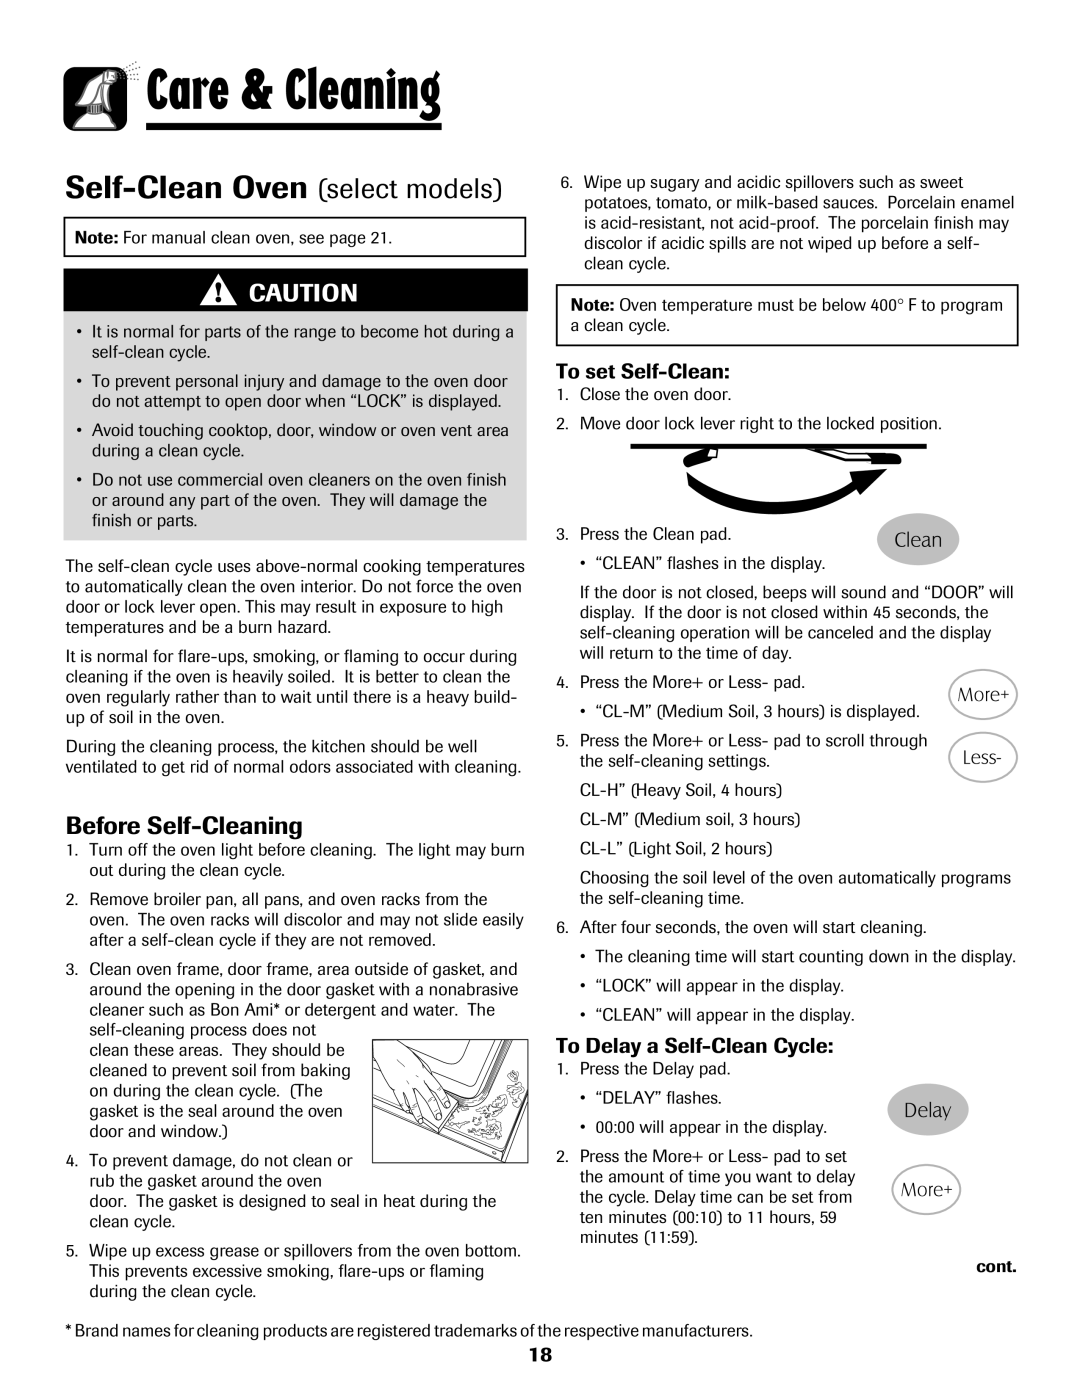 Maytag 8113P424-60 manual Care & Cleaning, Before Self-Cleaning, To set Self-Clean, To Delay a Self-Clean Cycle 